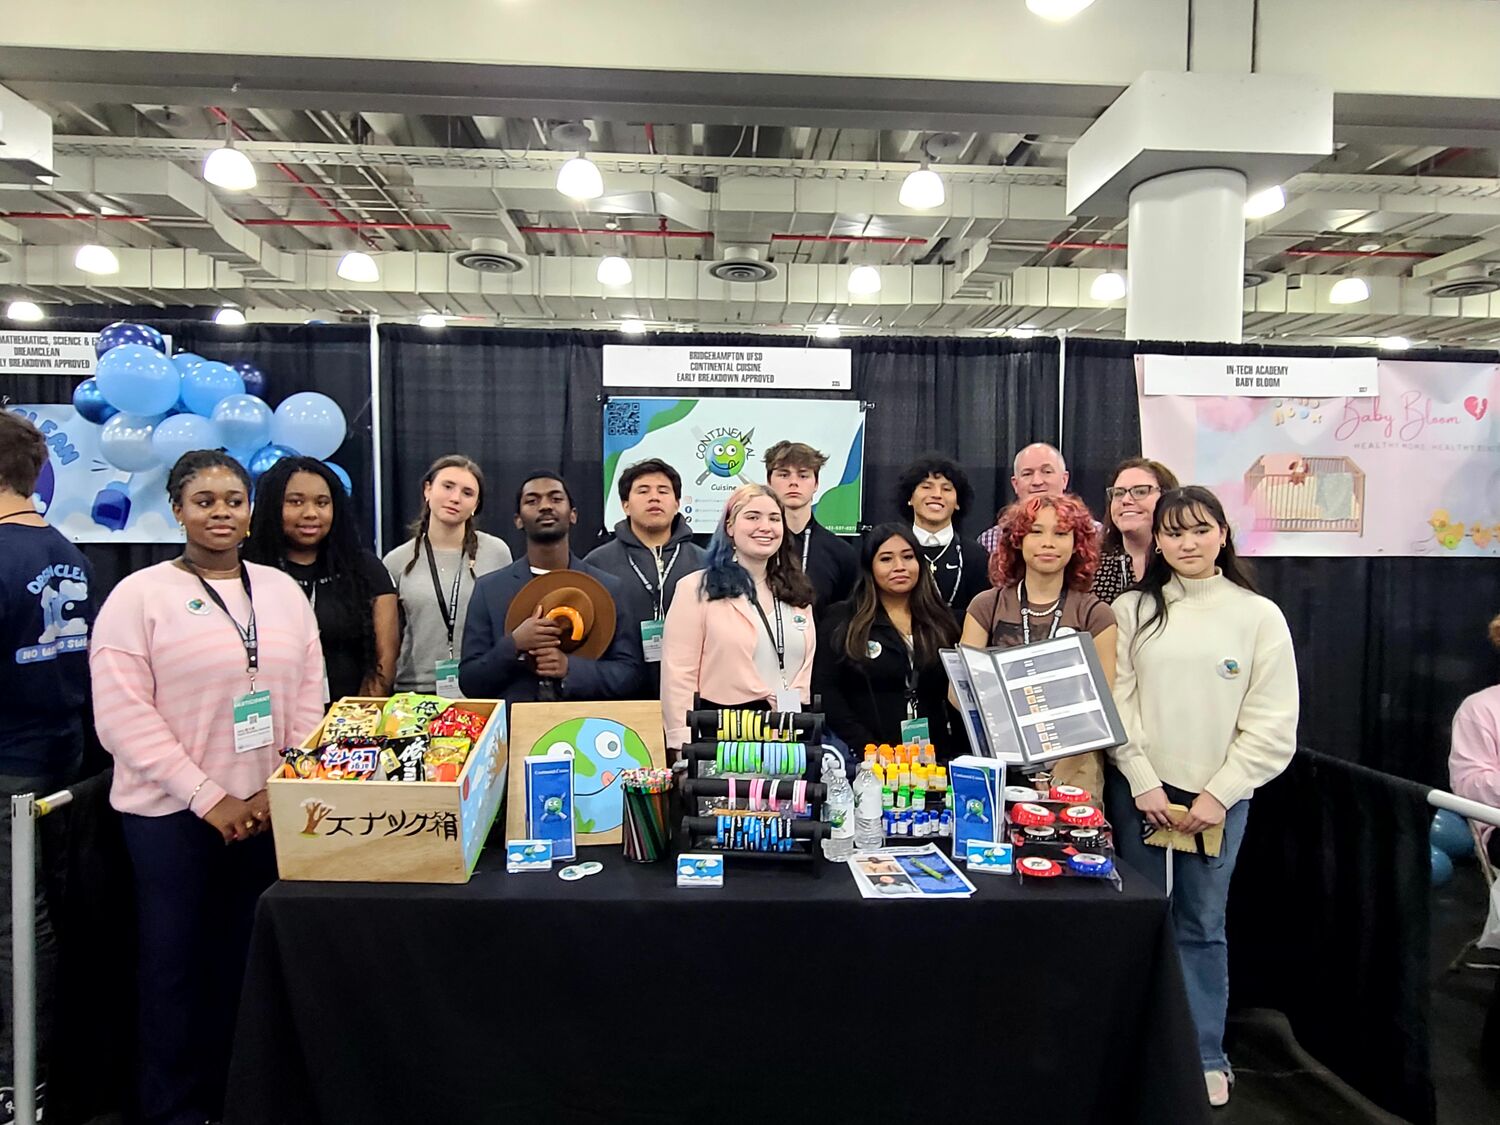 Bridgehampton School District took part in the 2024 Youth Business Summit International Trade Show & Exhibition at the Javits Center.  Bridgehampton’s virtual enterprise and marketing classes, which exhibited alongside 350 students-created companies, generated over $130,000 in virtual sales. The exhibition attracted more than 4,000 students from across the globe. Virtual Enterprise is a class offered to high schoolers where students learn to successfully manage a simulated business, manage expenses and engage in competitive business strategy. COURTESY BRIDGEHAMPTON SCHOOL DISTRICT